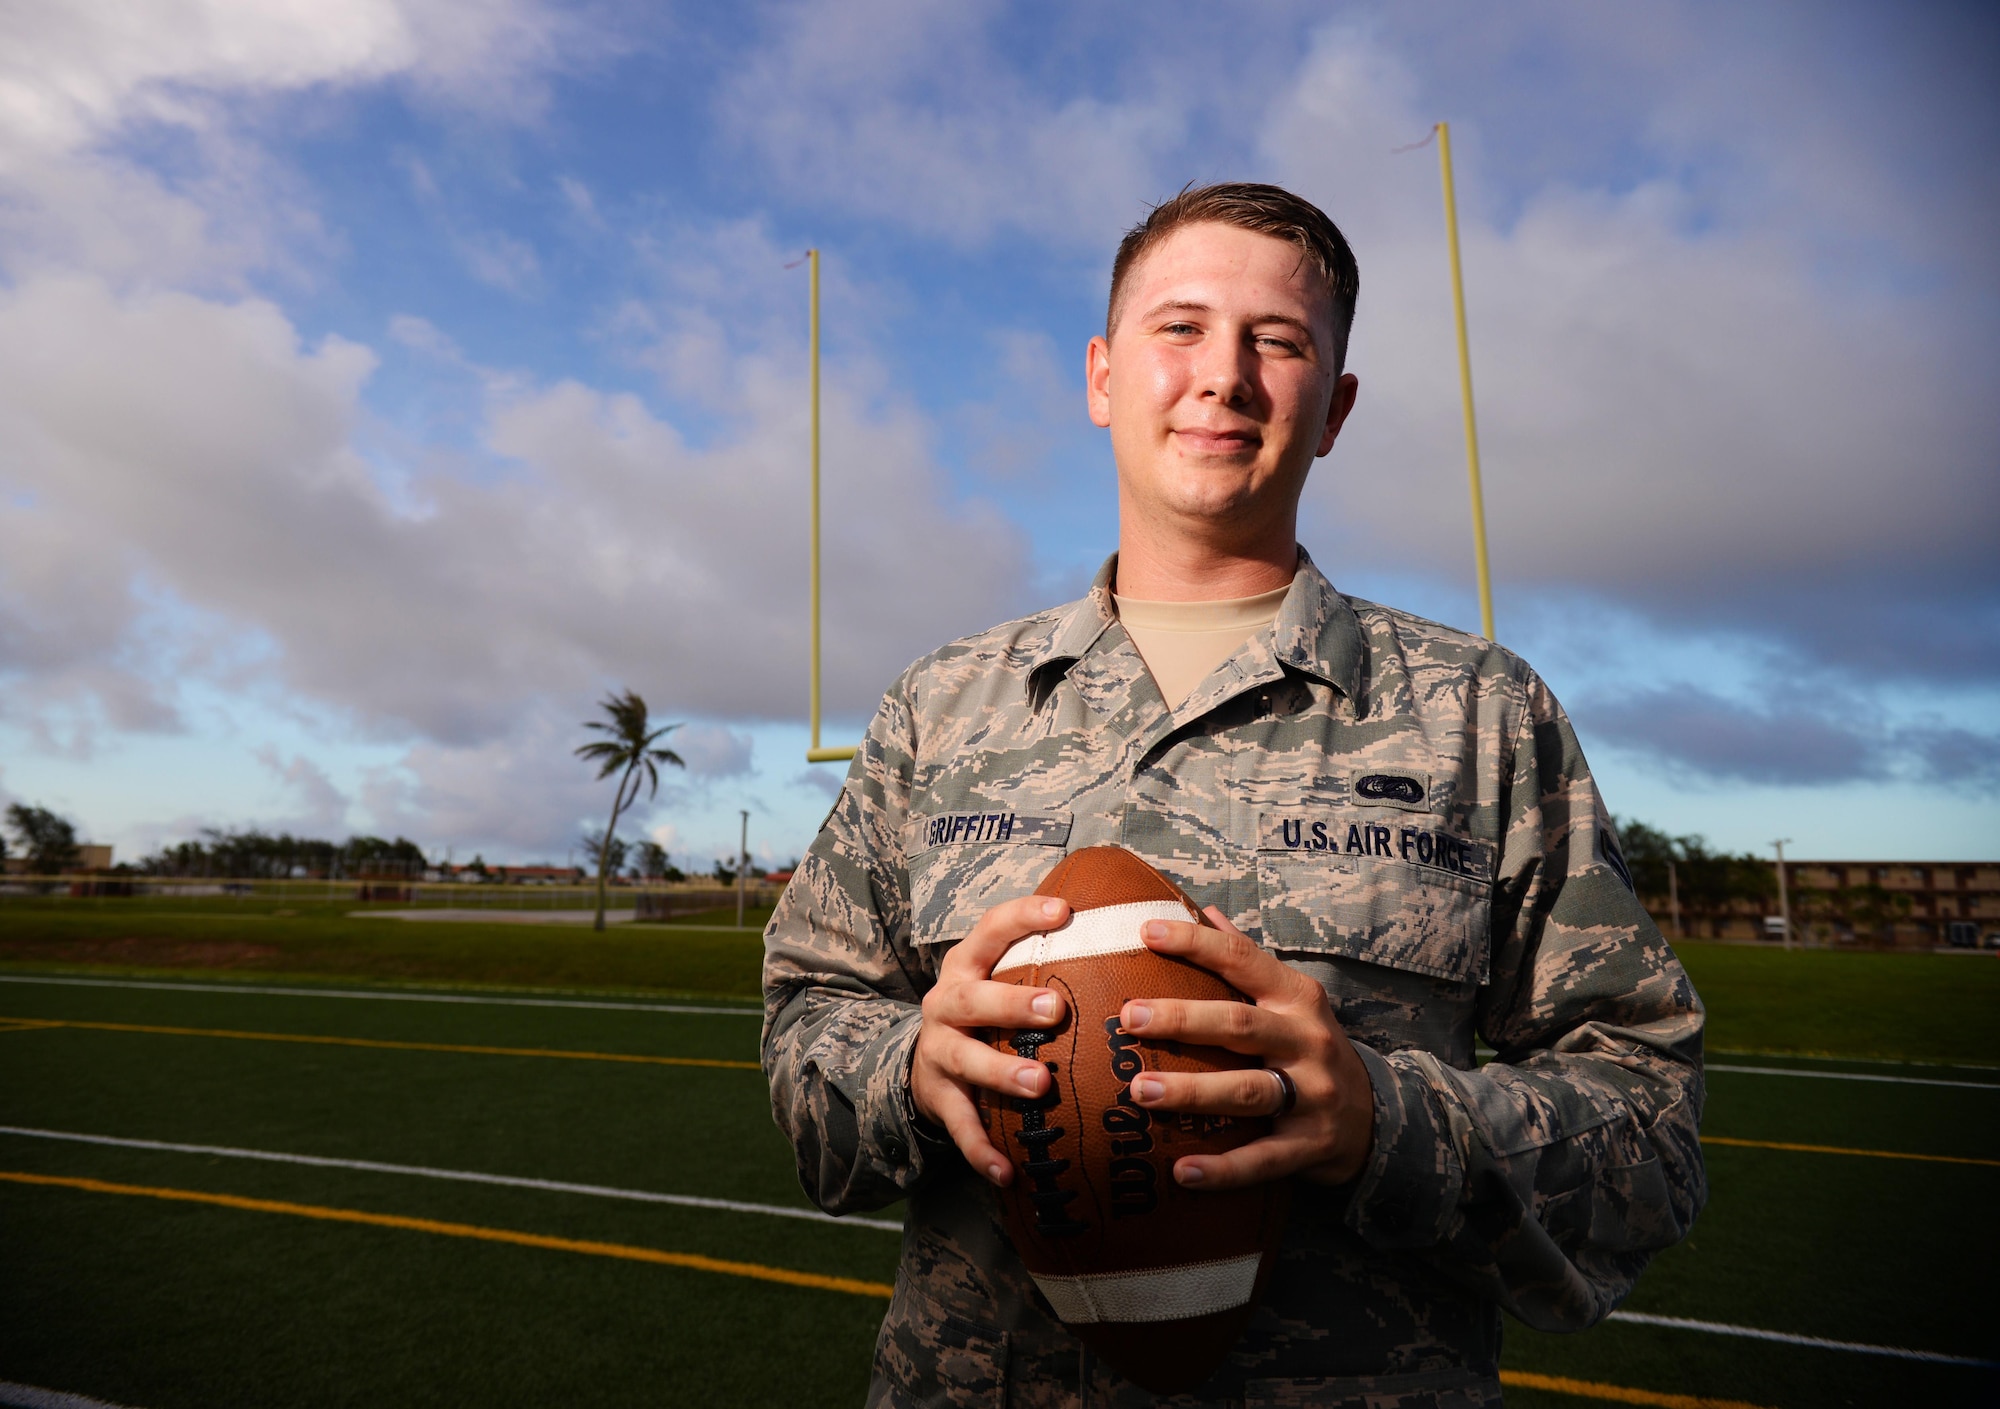 Senior Airman Presley Griffith, a 36th Mobility Response Squadron executive assistant, offers a free football spring practice camp as volunteer coach at Andersen Air Force Base, Guam. A former high school quarterback, Griffith is working toward his goal of becoming a high school football coach. (U.S. Air Force photo/Senior Airman Alexander W. Riedel)